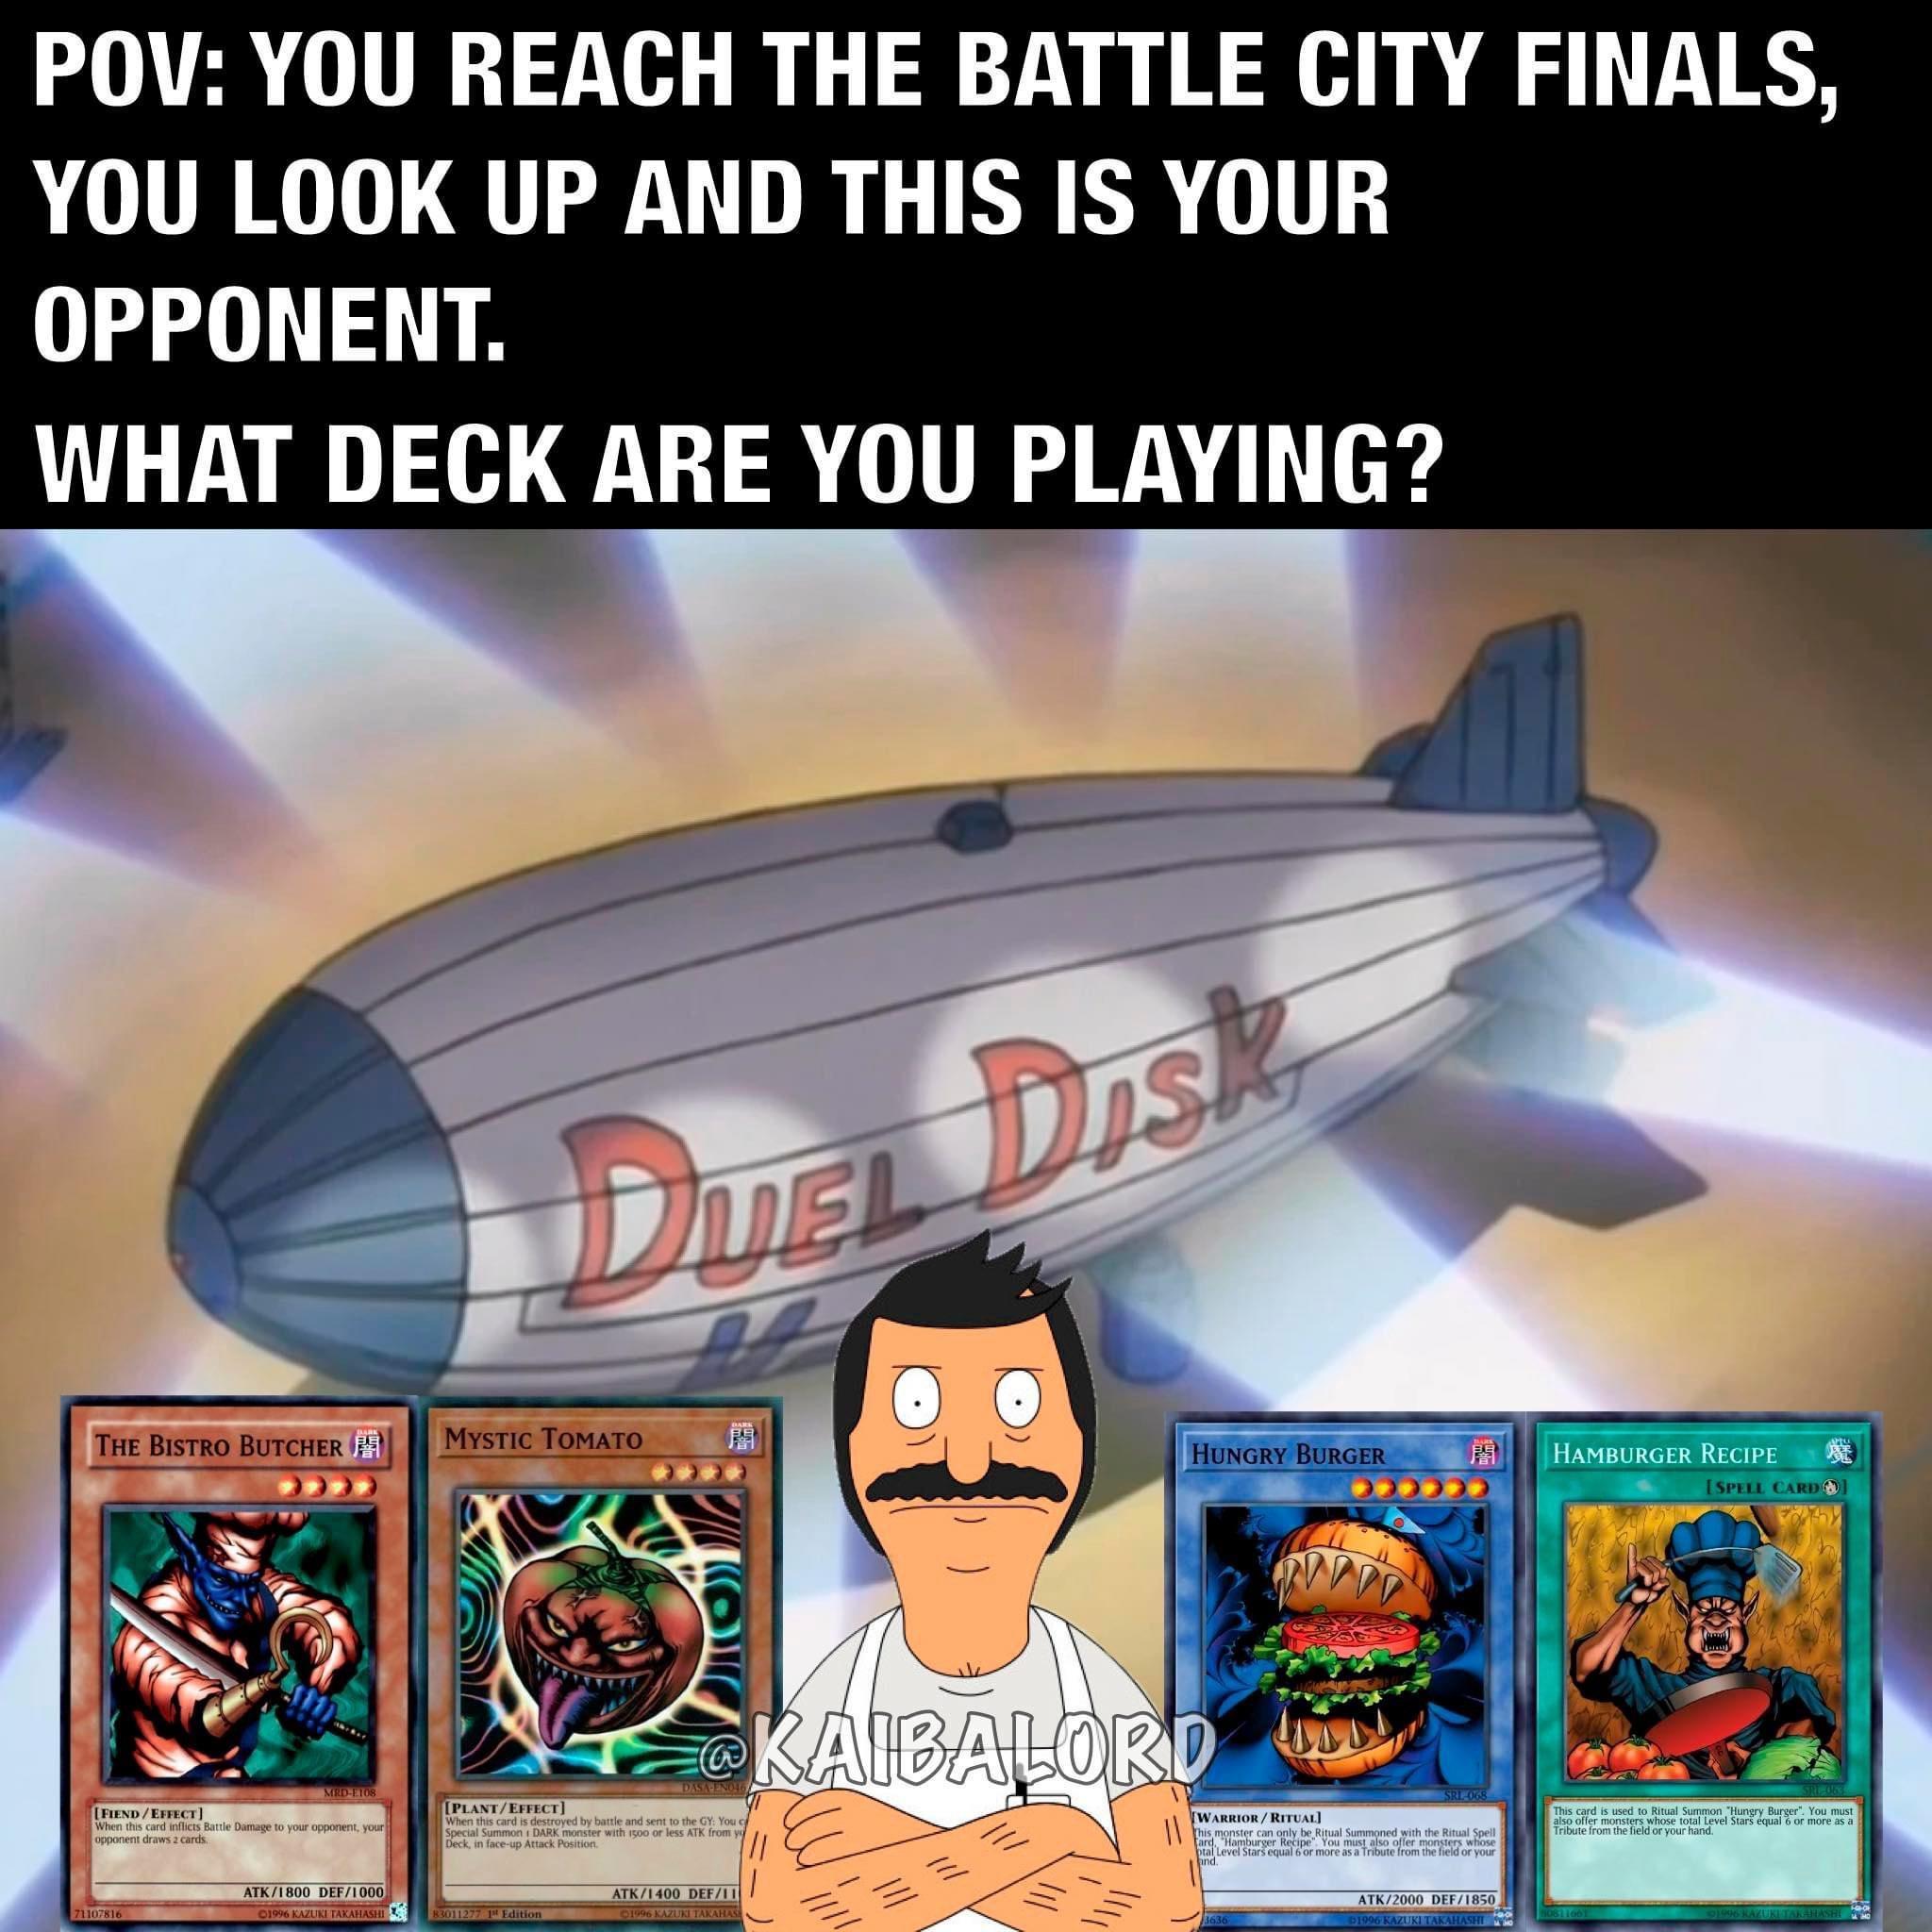 funny pics and memes - cartoon - Pov You Reach The Battle City Finals, You Look Up And This Is Your Opponent. What Deck Are You Playing? Due Desk The Bistro Butcher Mystic Tomato Hungry Burger Hamburger Recipe Spell Card Kaibalord Ale w MrdEtos Fiend Effe